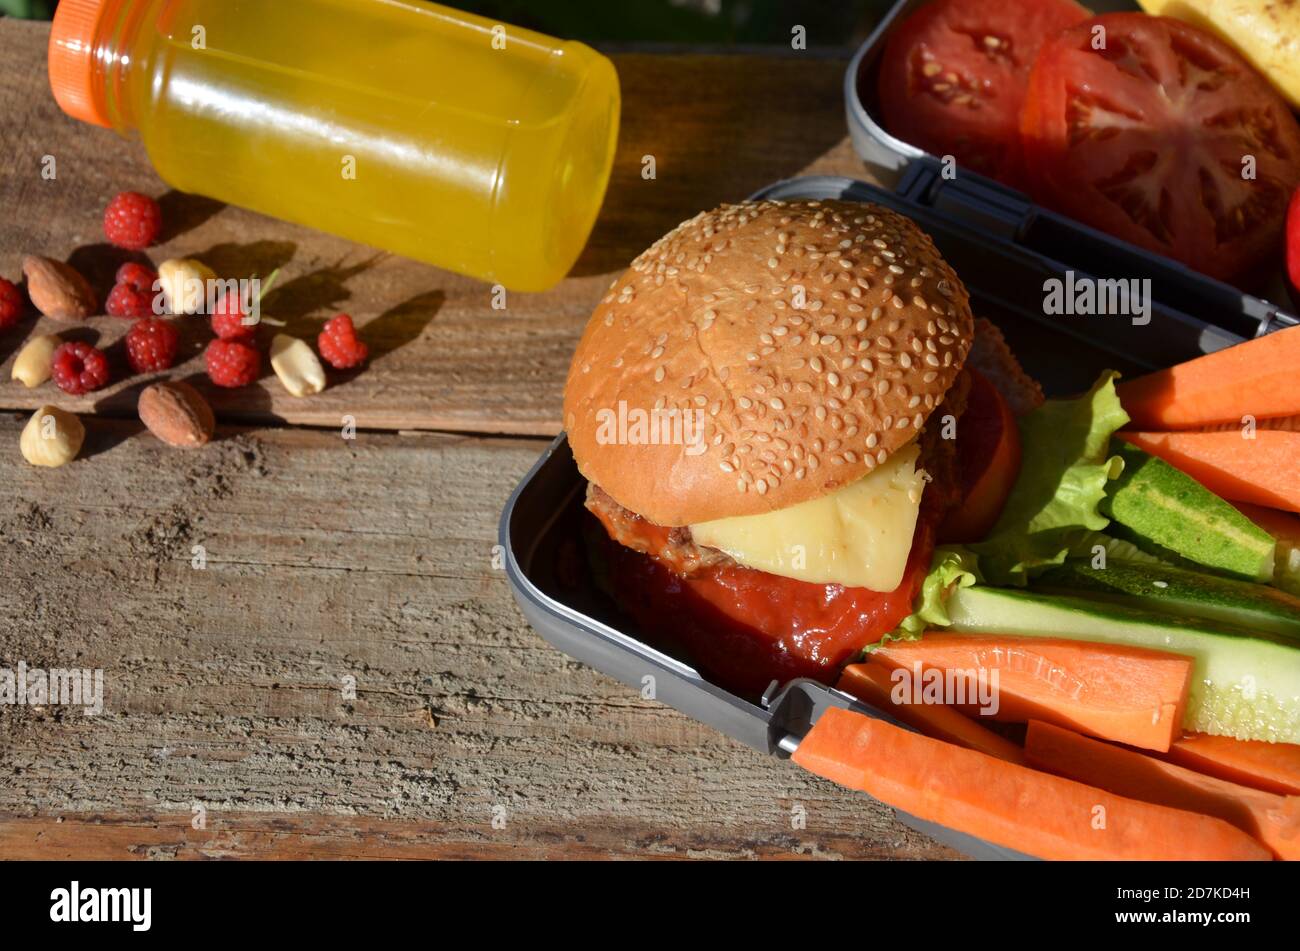 Lunch boxes with food ready to go for work or school, meal preparation or dieting concept. Hamburgers with lettuce. yellow orange juice. with banana Stock Photo